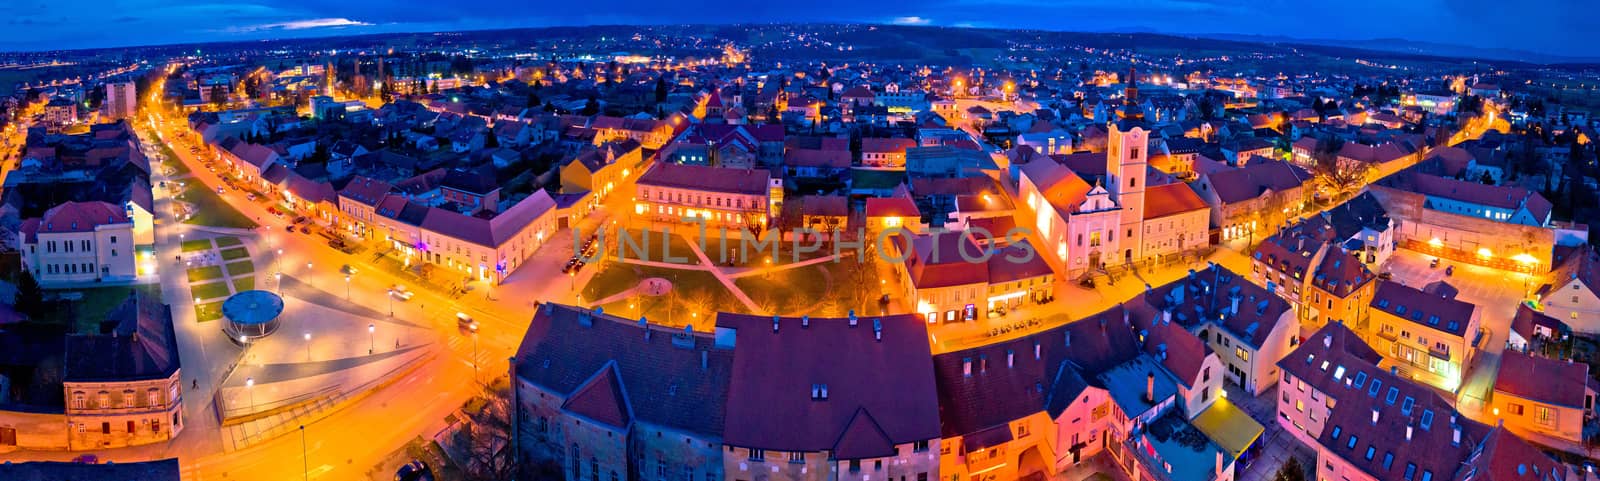 Town of Krizevci aerial panoramic night view by xbrchx